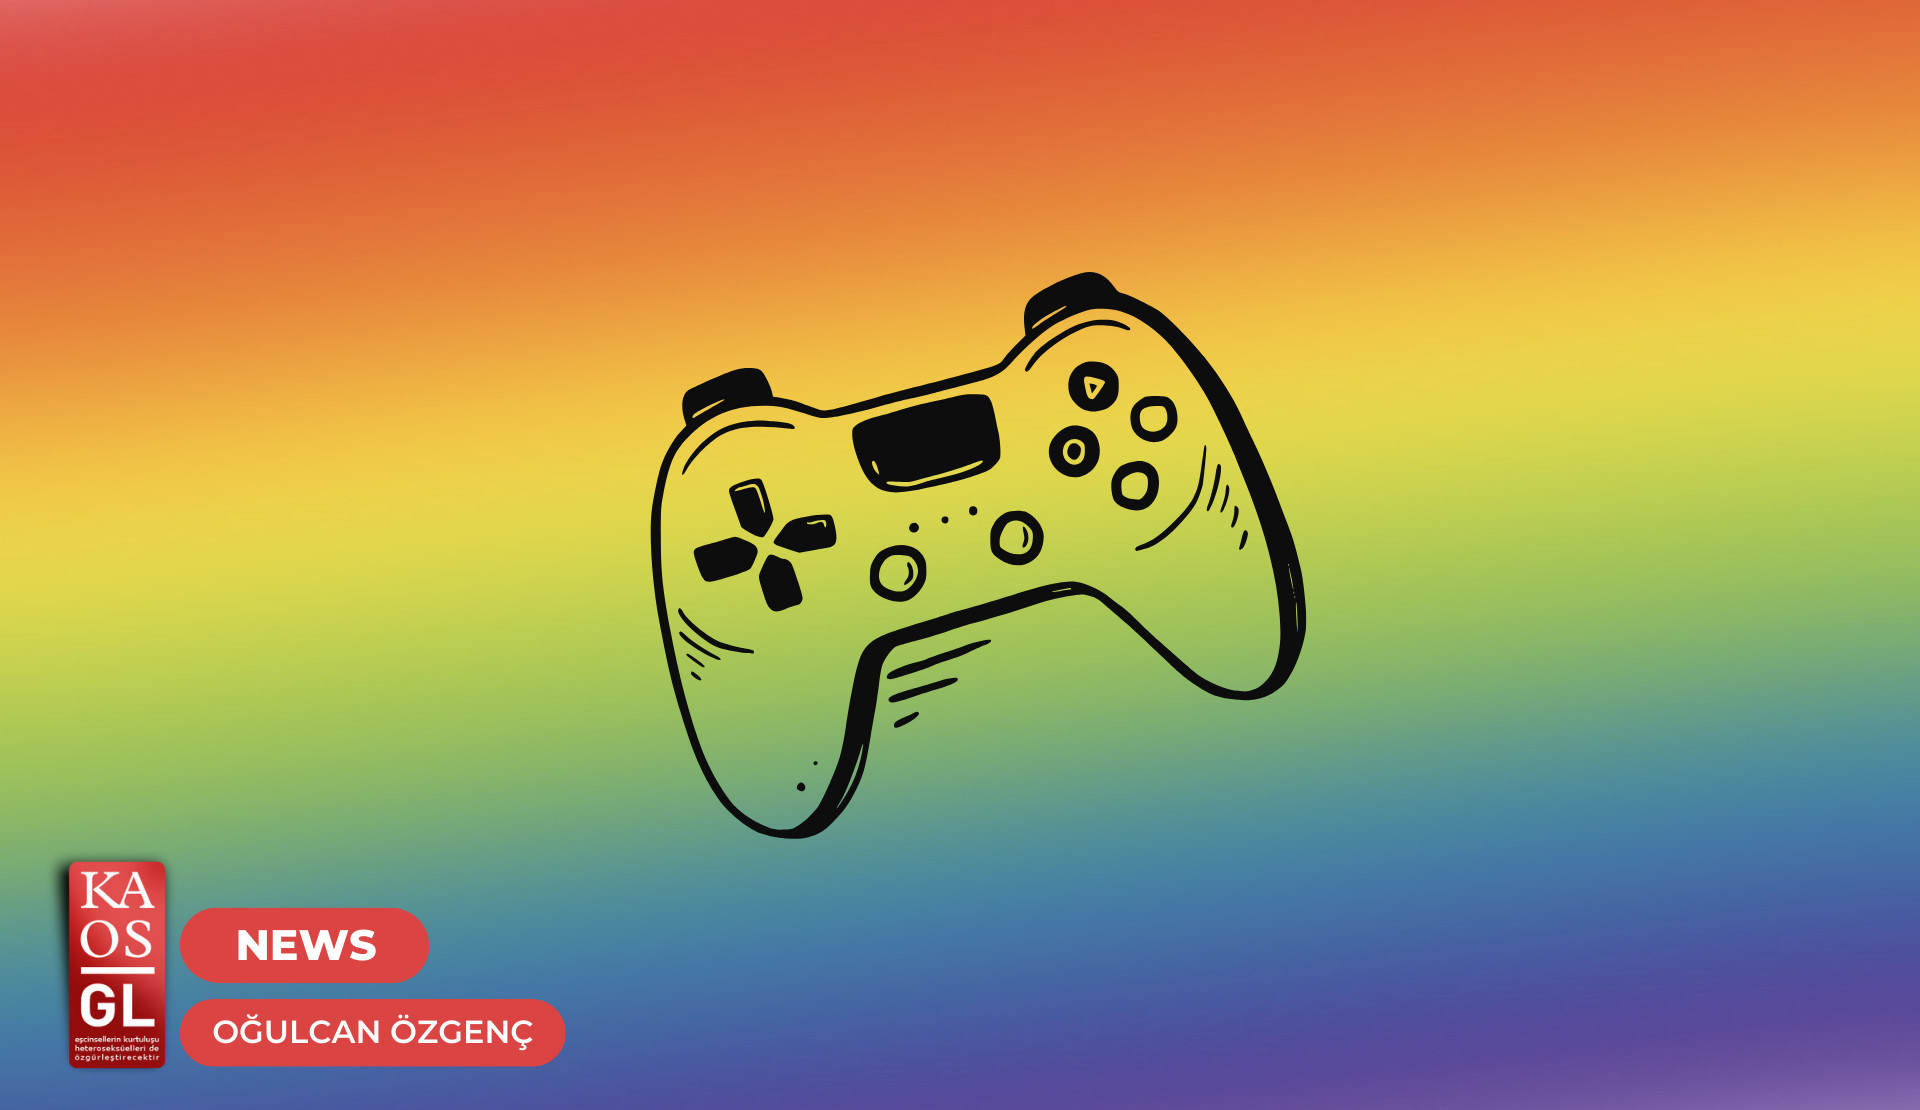 The game industry failed in terms of LGBTQ+ rights | Kaos GL - News Portal for LGBTI+